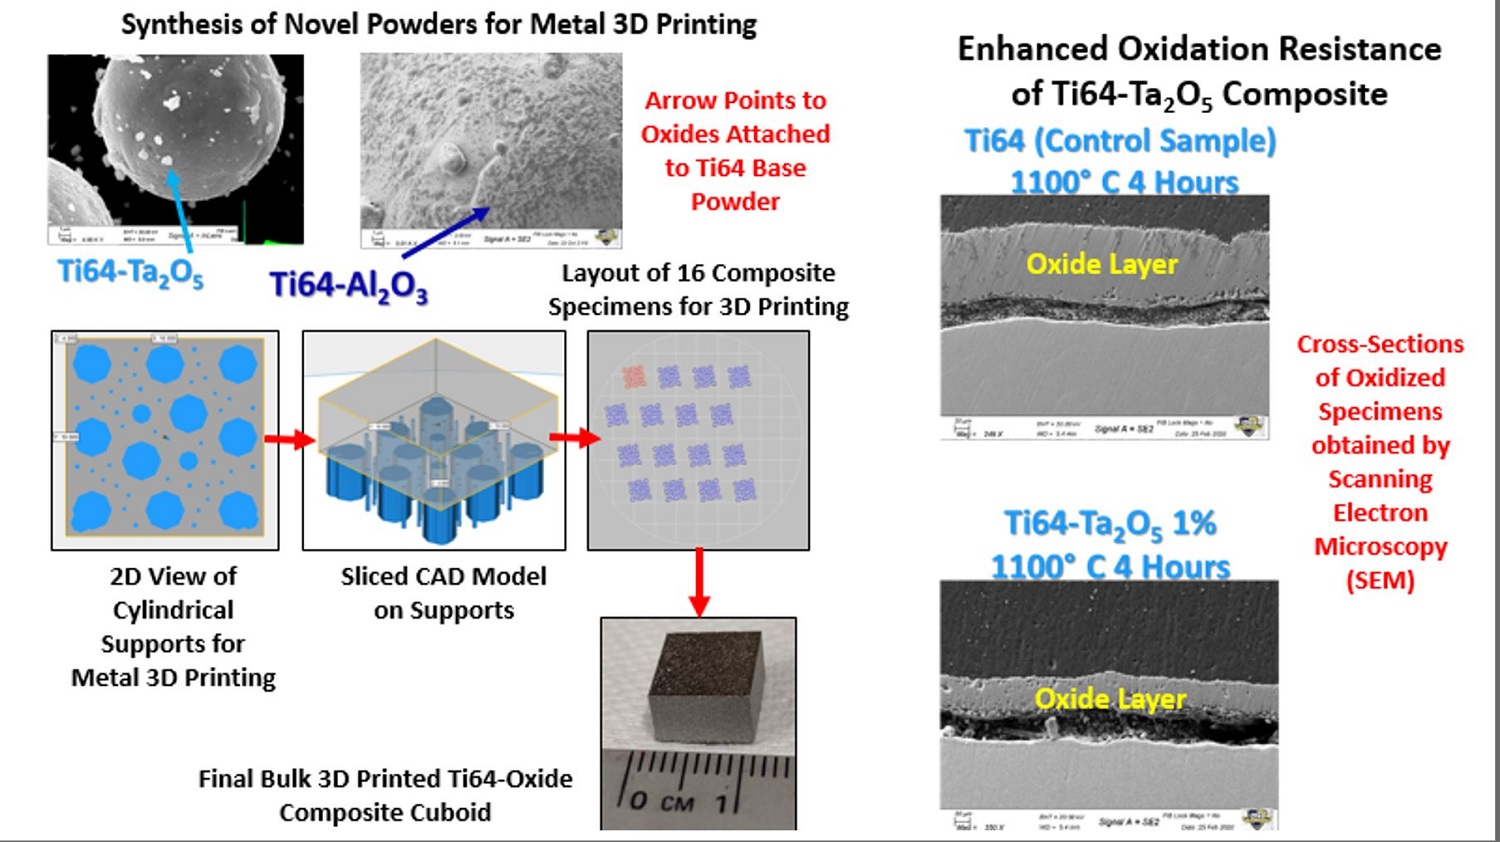 3D Metal Printing of Oxide Reinforced Composites by Selective Laser Melting Prof. Andy Nieto, ENS Andrew Reinhart Thesis